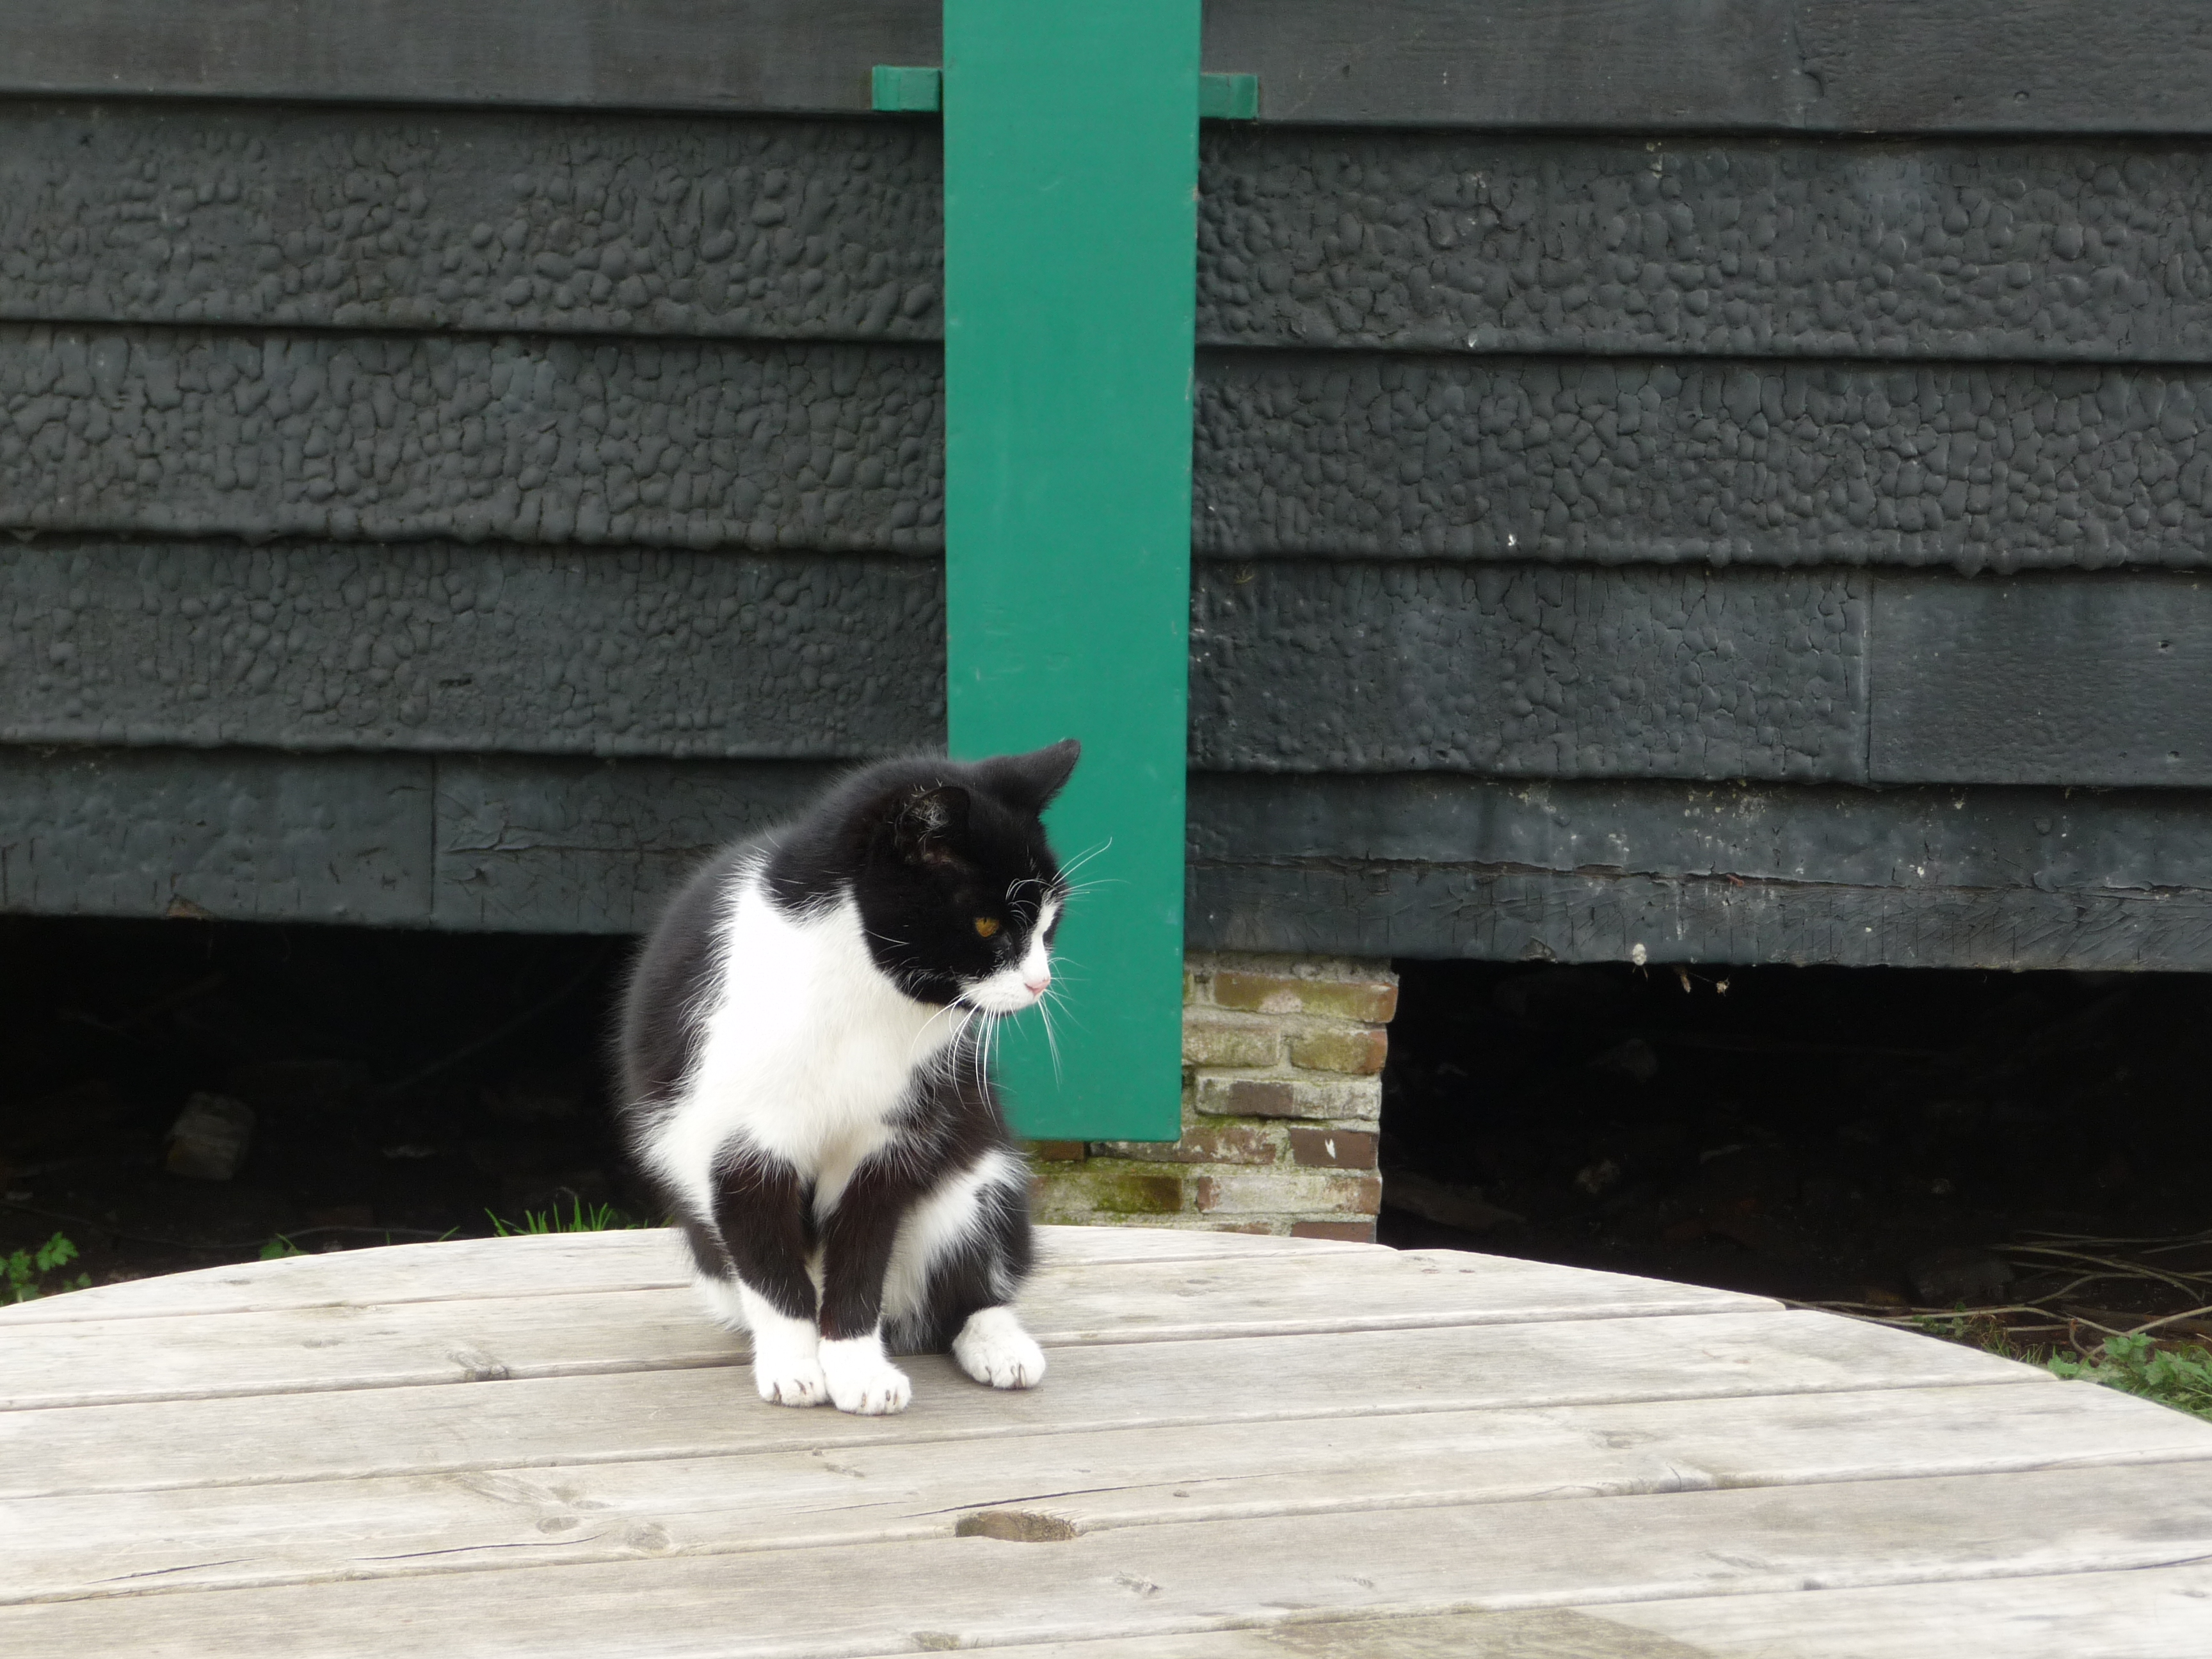 The Cat at "The Cat" Windmill